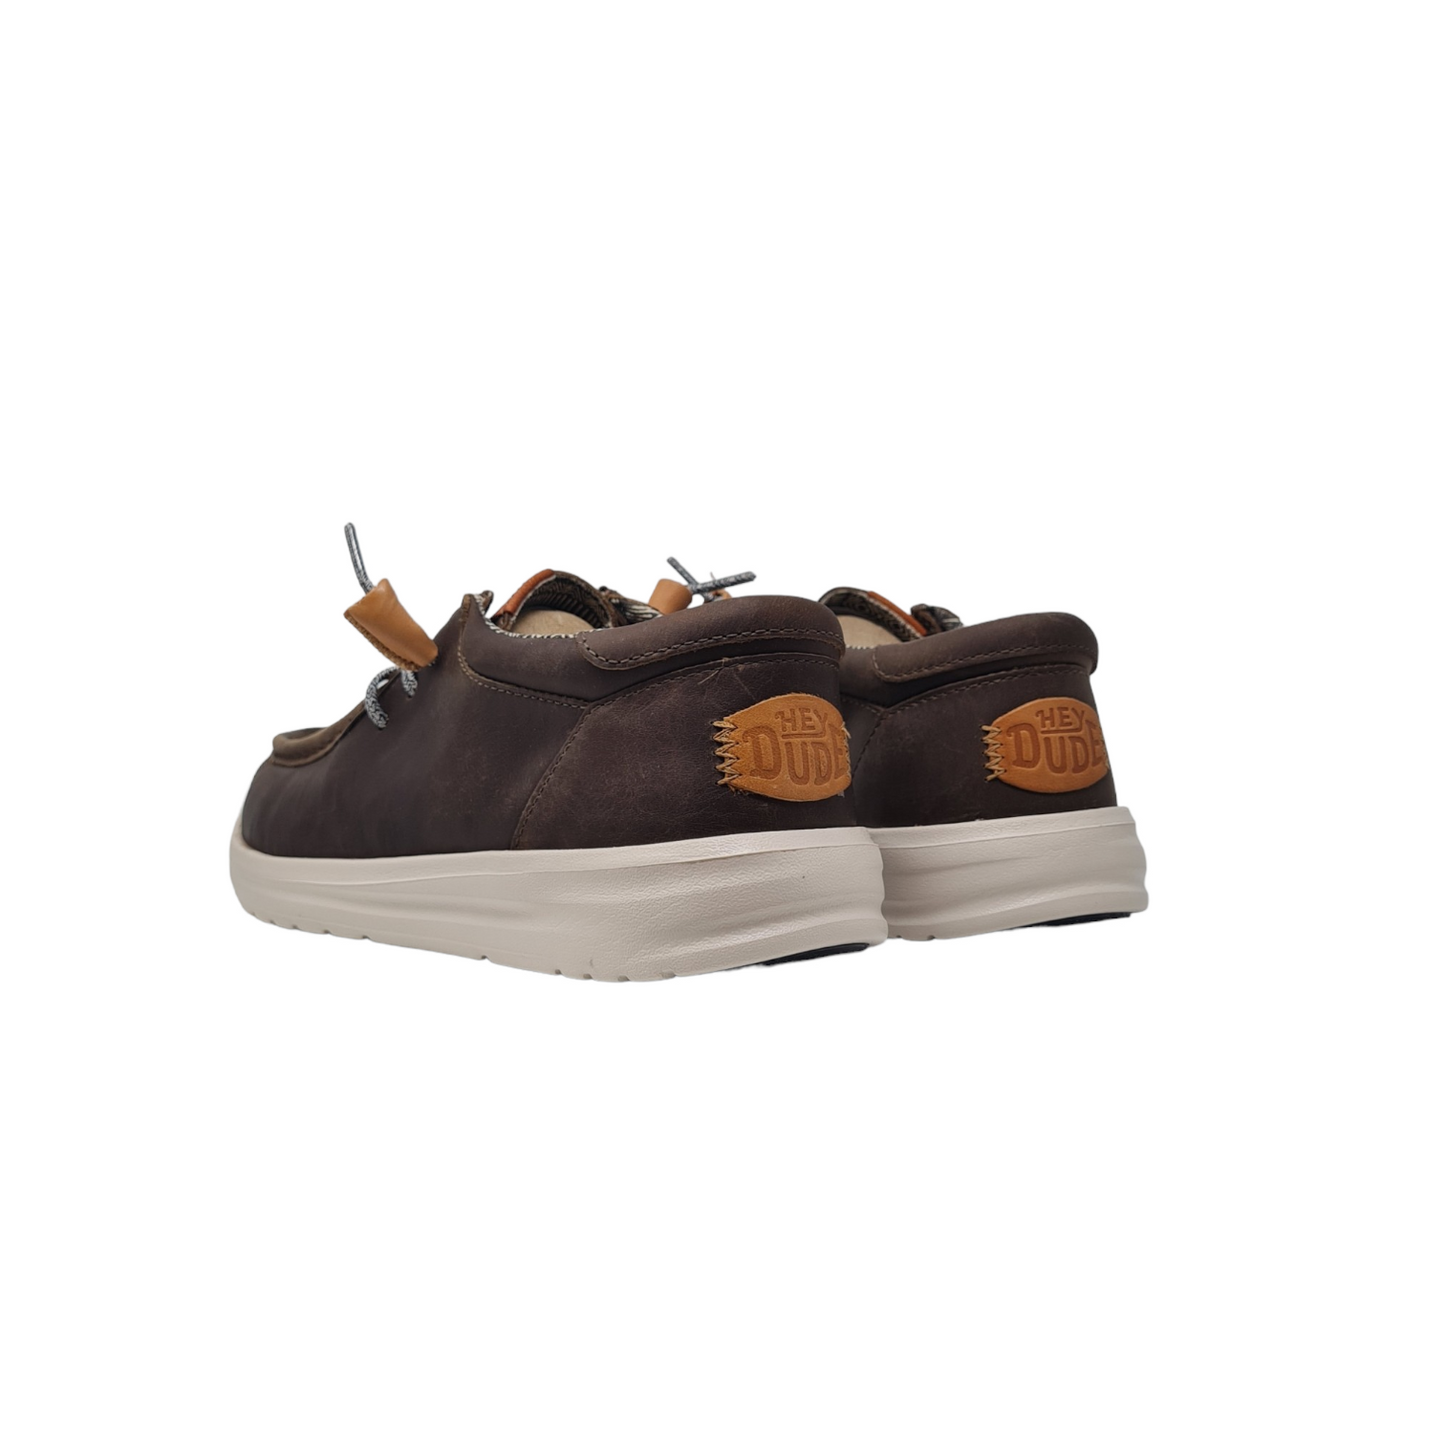 Wally grip craft moccasin 40175-030